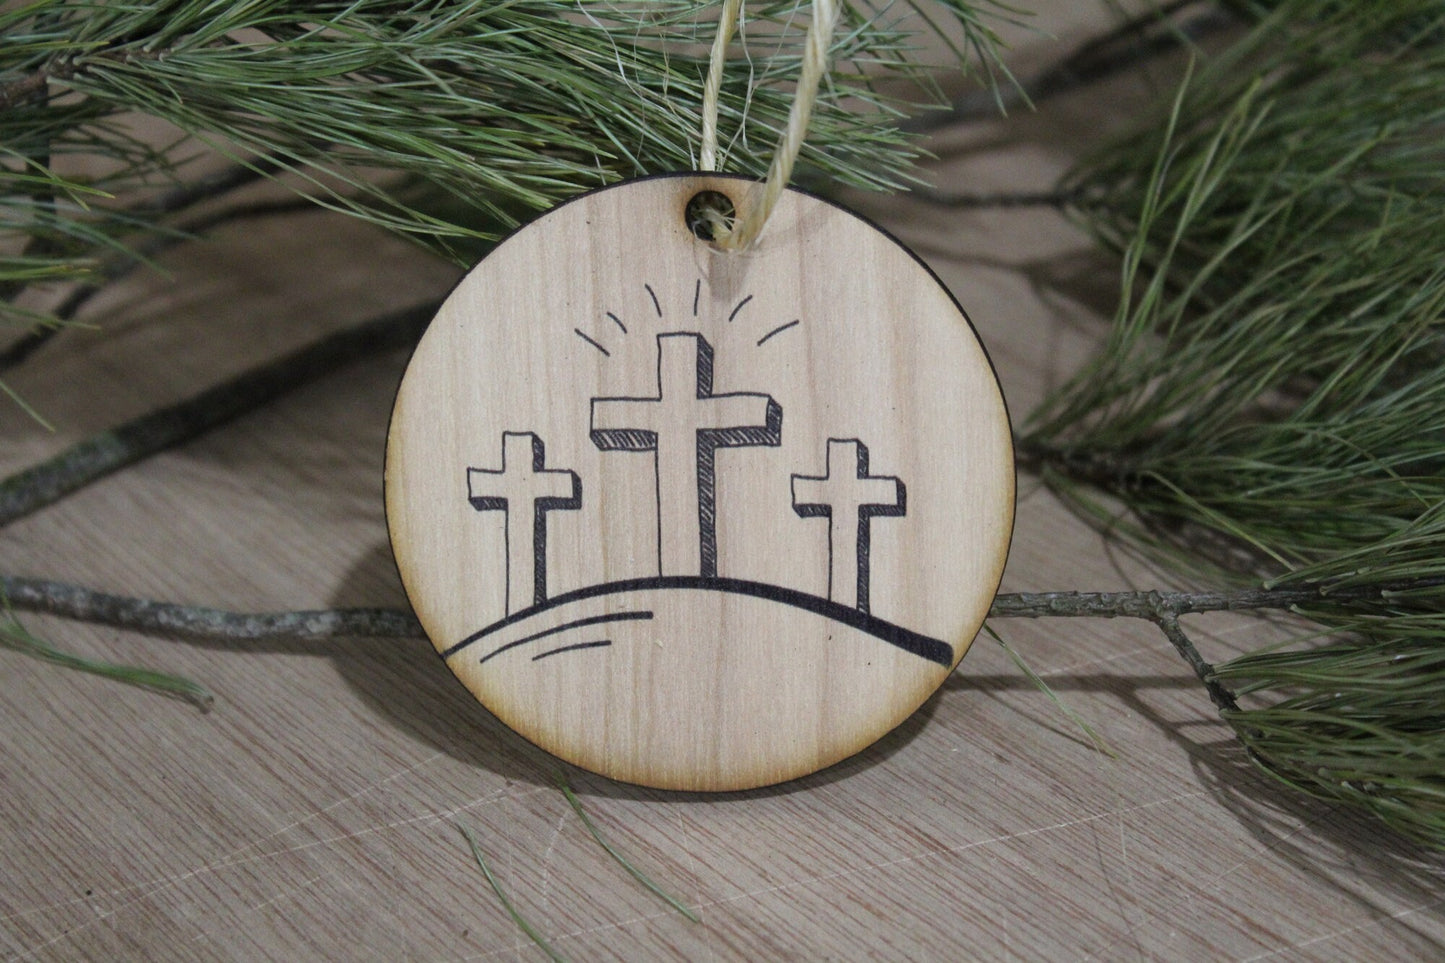 Risen Three Crosses Ornament Wood Slice Cross on the Hill Jesus Second Coming Easter Christmas Tree Primitive Rustic Religious Farmhouse